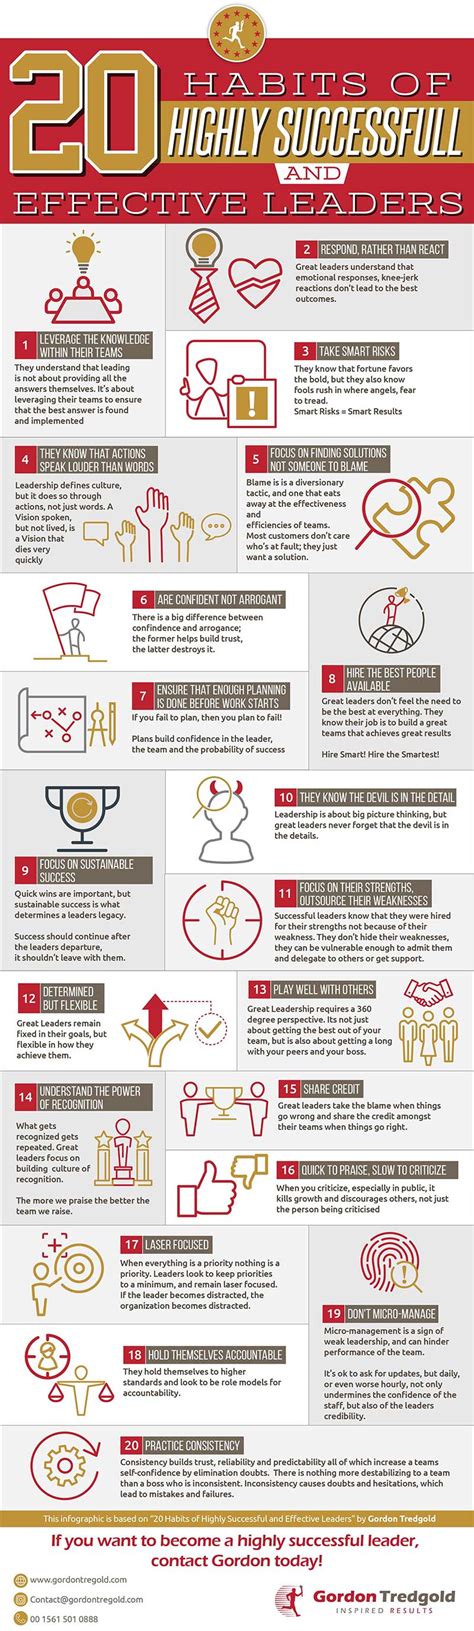 20 habits of highly effective leaders [infographic] ceoworld magazine